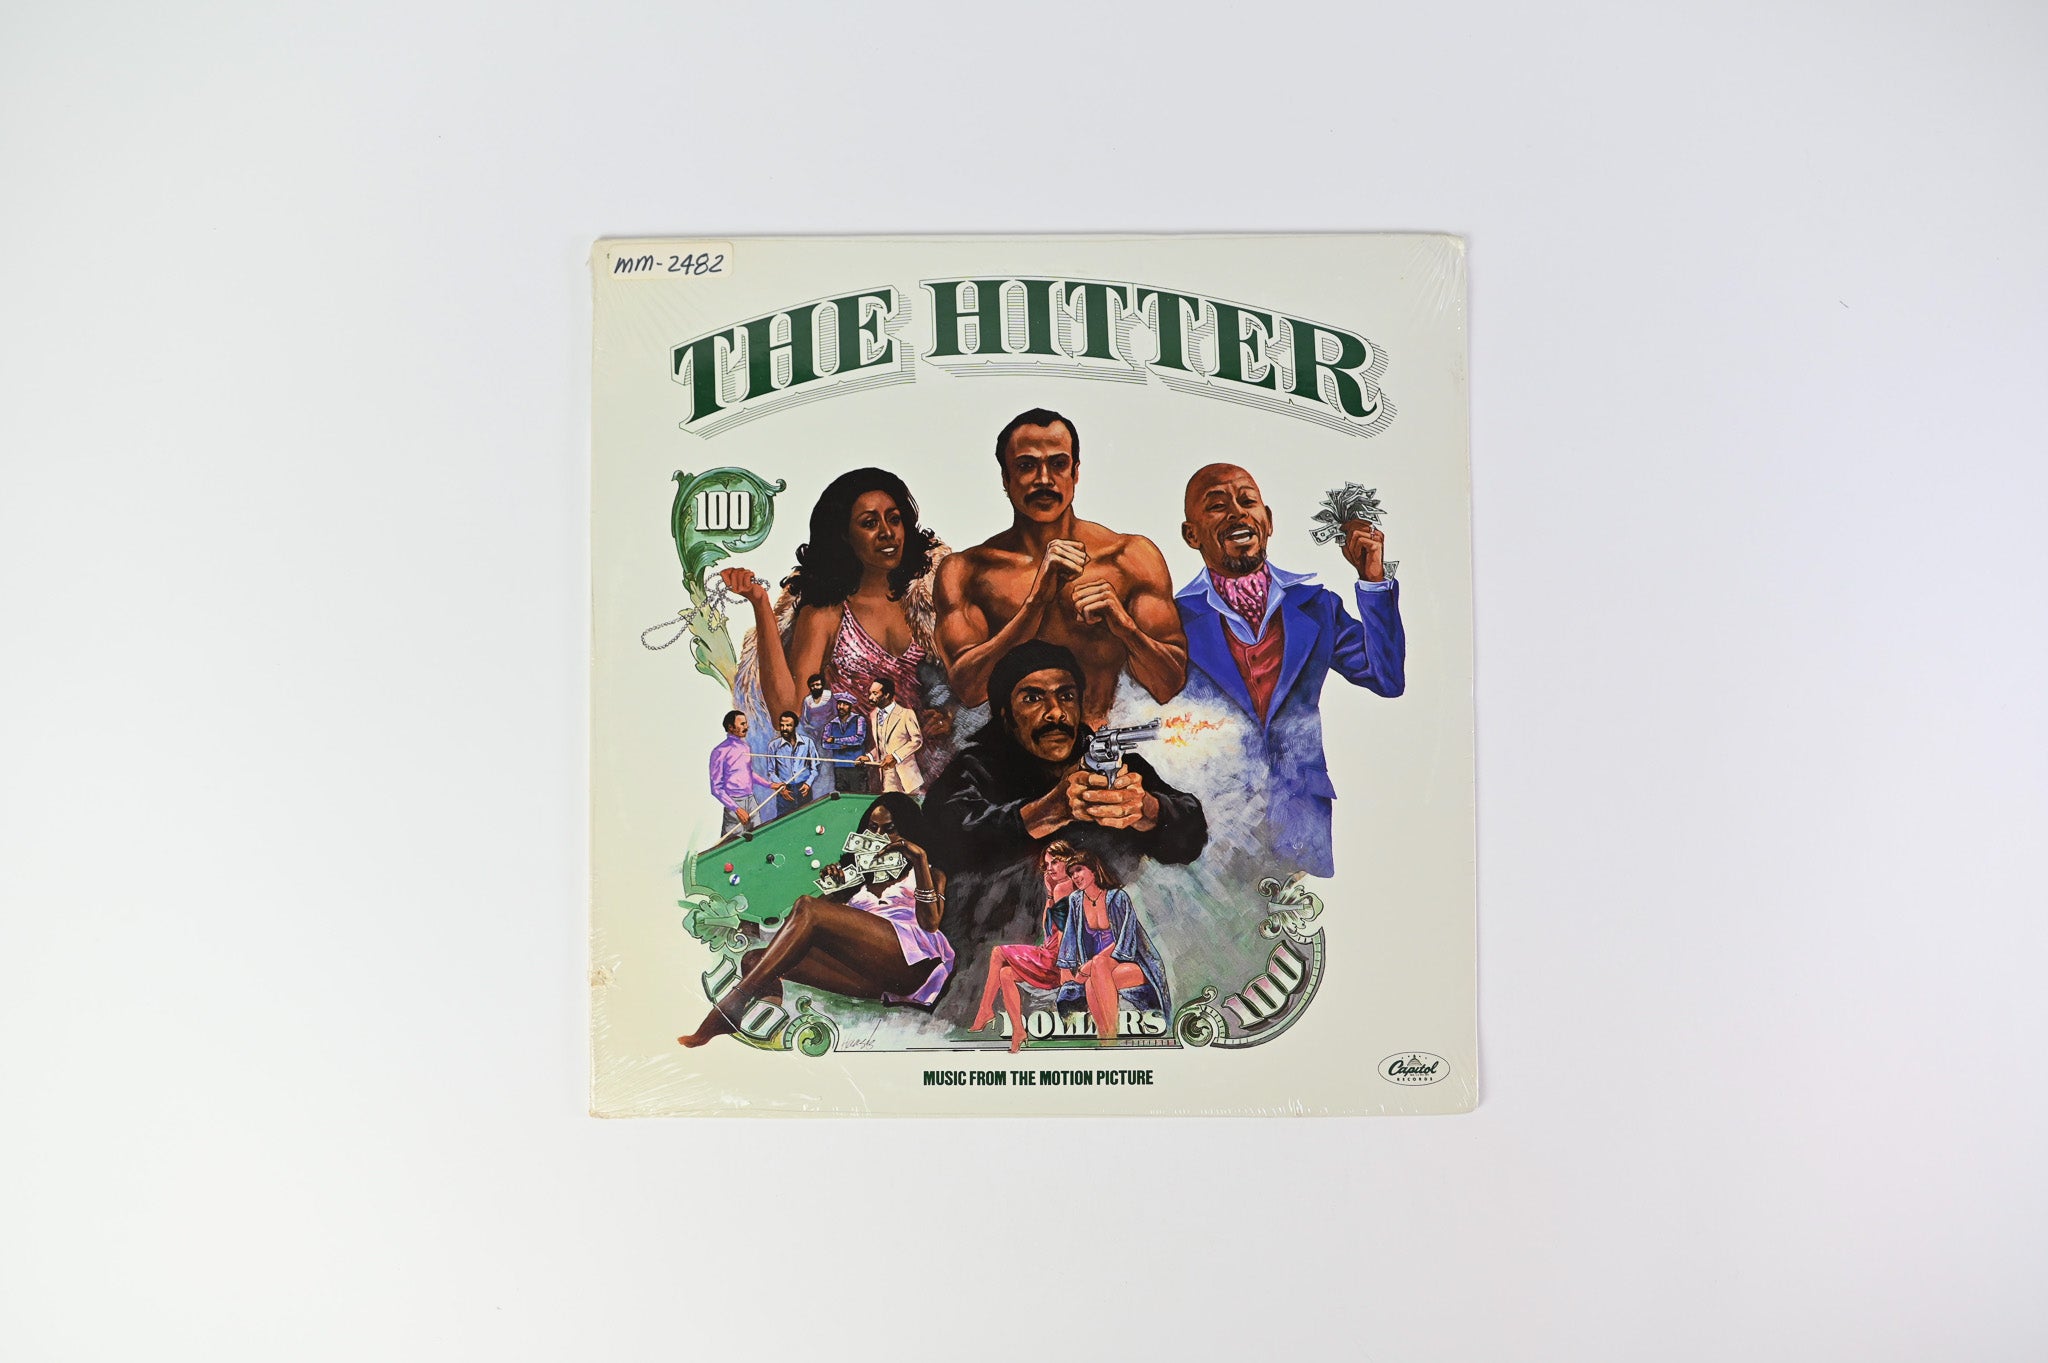 Various - The Hitter (Music From The Motion Picture) on Capitol Sealed